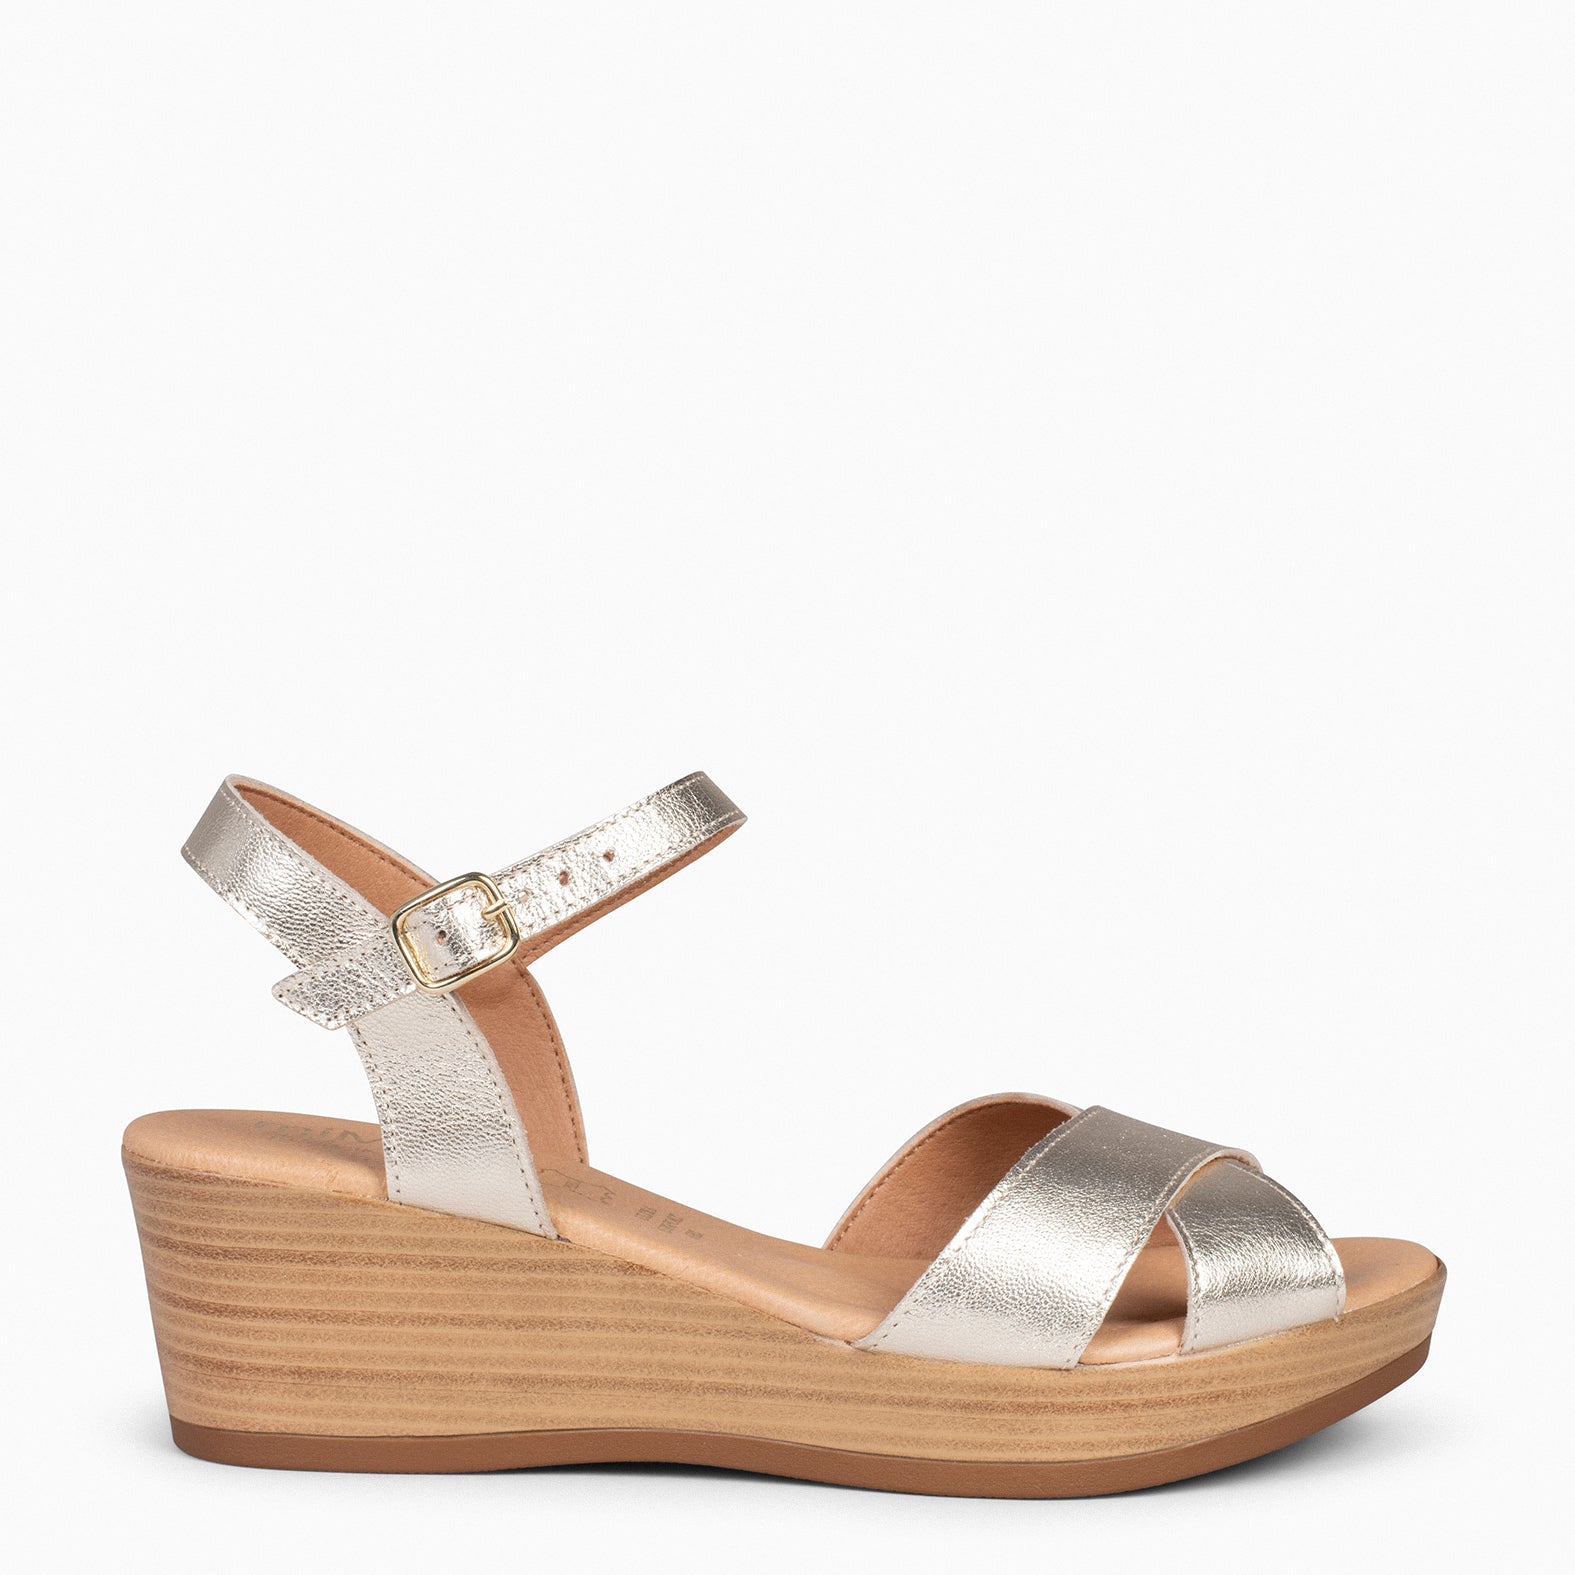 MAR – GOLD WEDGE SHOES